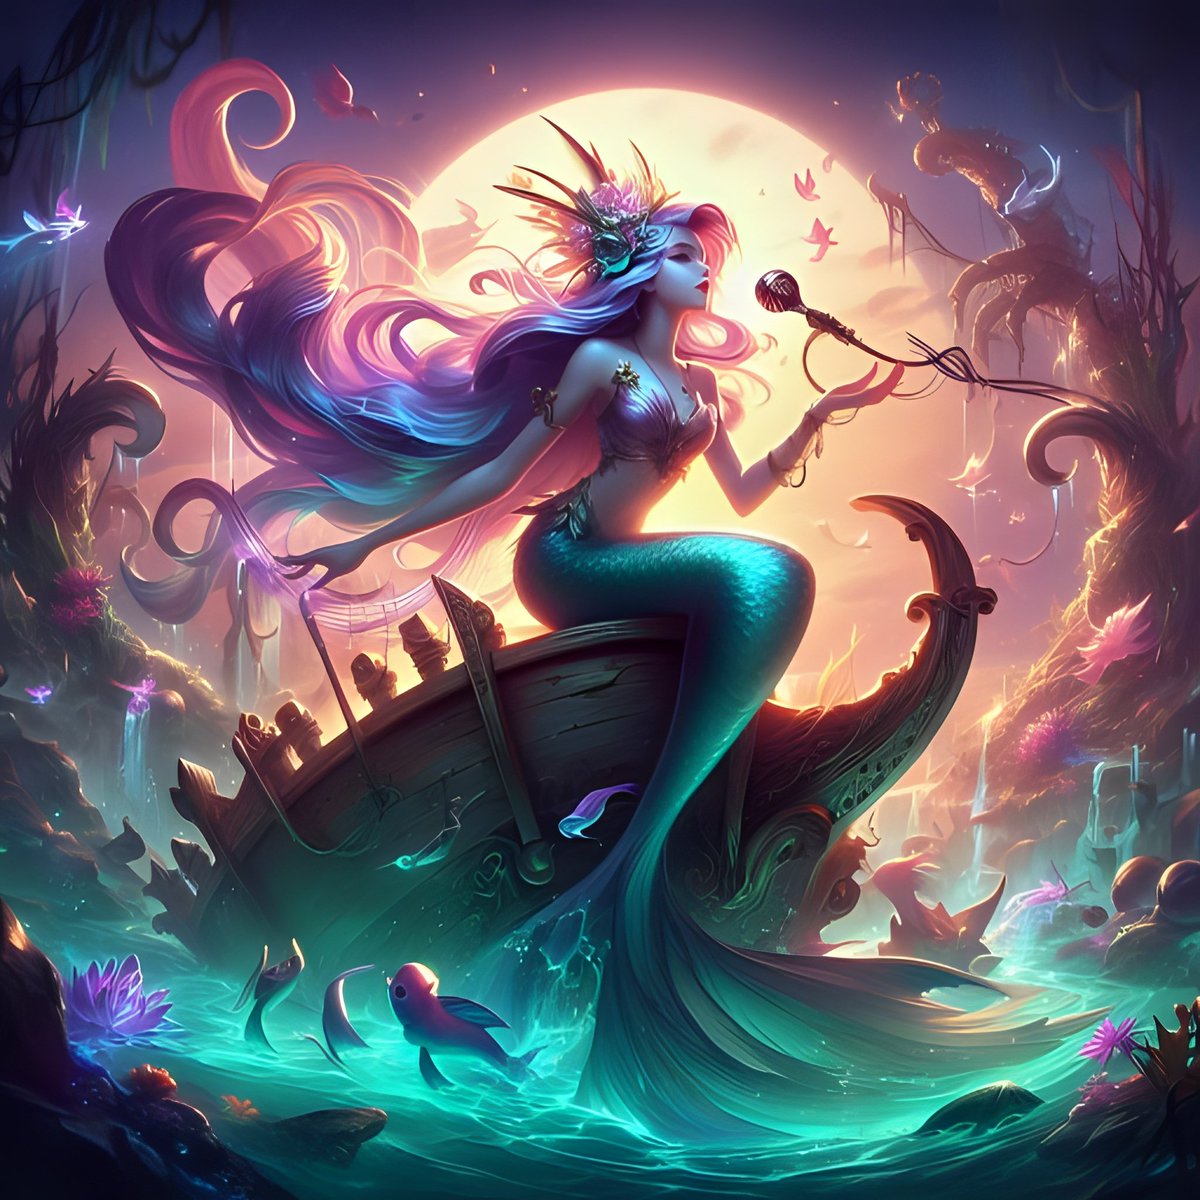 🧜‍♀️🌊✨ Immerse yourself in the enchanting melody of the Siren's Ethereal Song, as she lures you into a world of whimsical beauty and mystical serenades. #EtherealSong 🆀🆃 ♻ Your 𝗠𝗲𝗿𝗺𝗮𝗶𝗱 𝗠𝗮𝗴𝗶𝗰 Art. #MakeArtSmiles ☞ 𝗔𝗟𝗧. Mermaids 𝗔𝗹𝗯𝘂𝗺 #Prompt 𝗦𝗵𝗮𝗿𝗲.